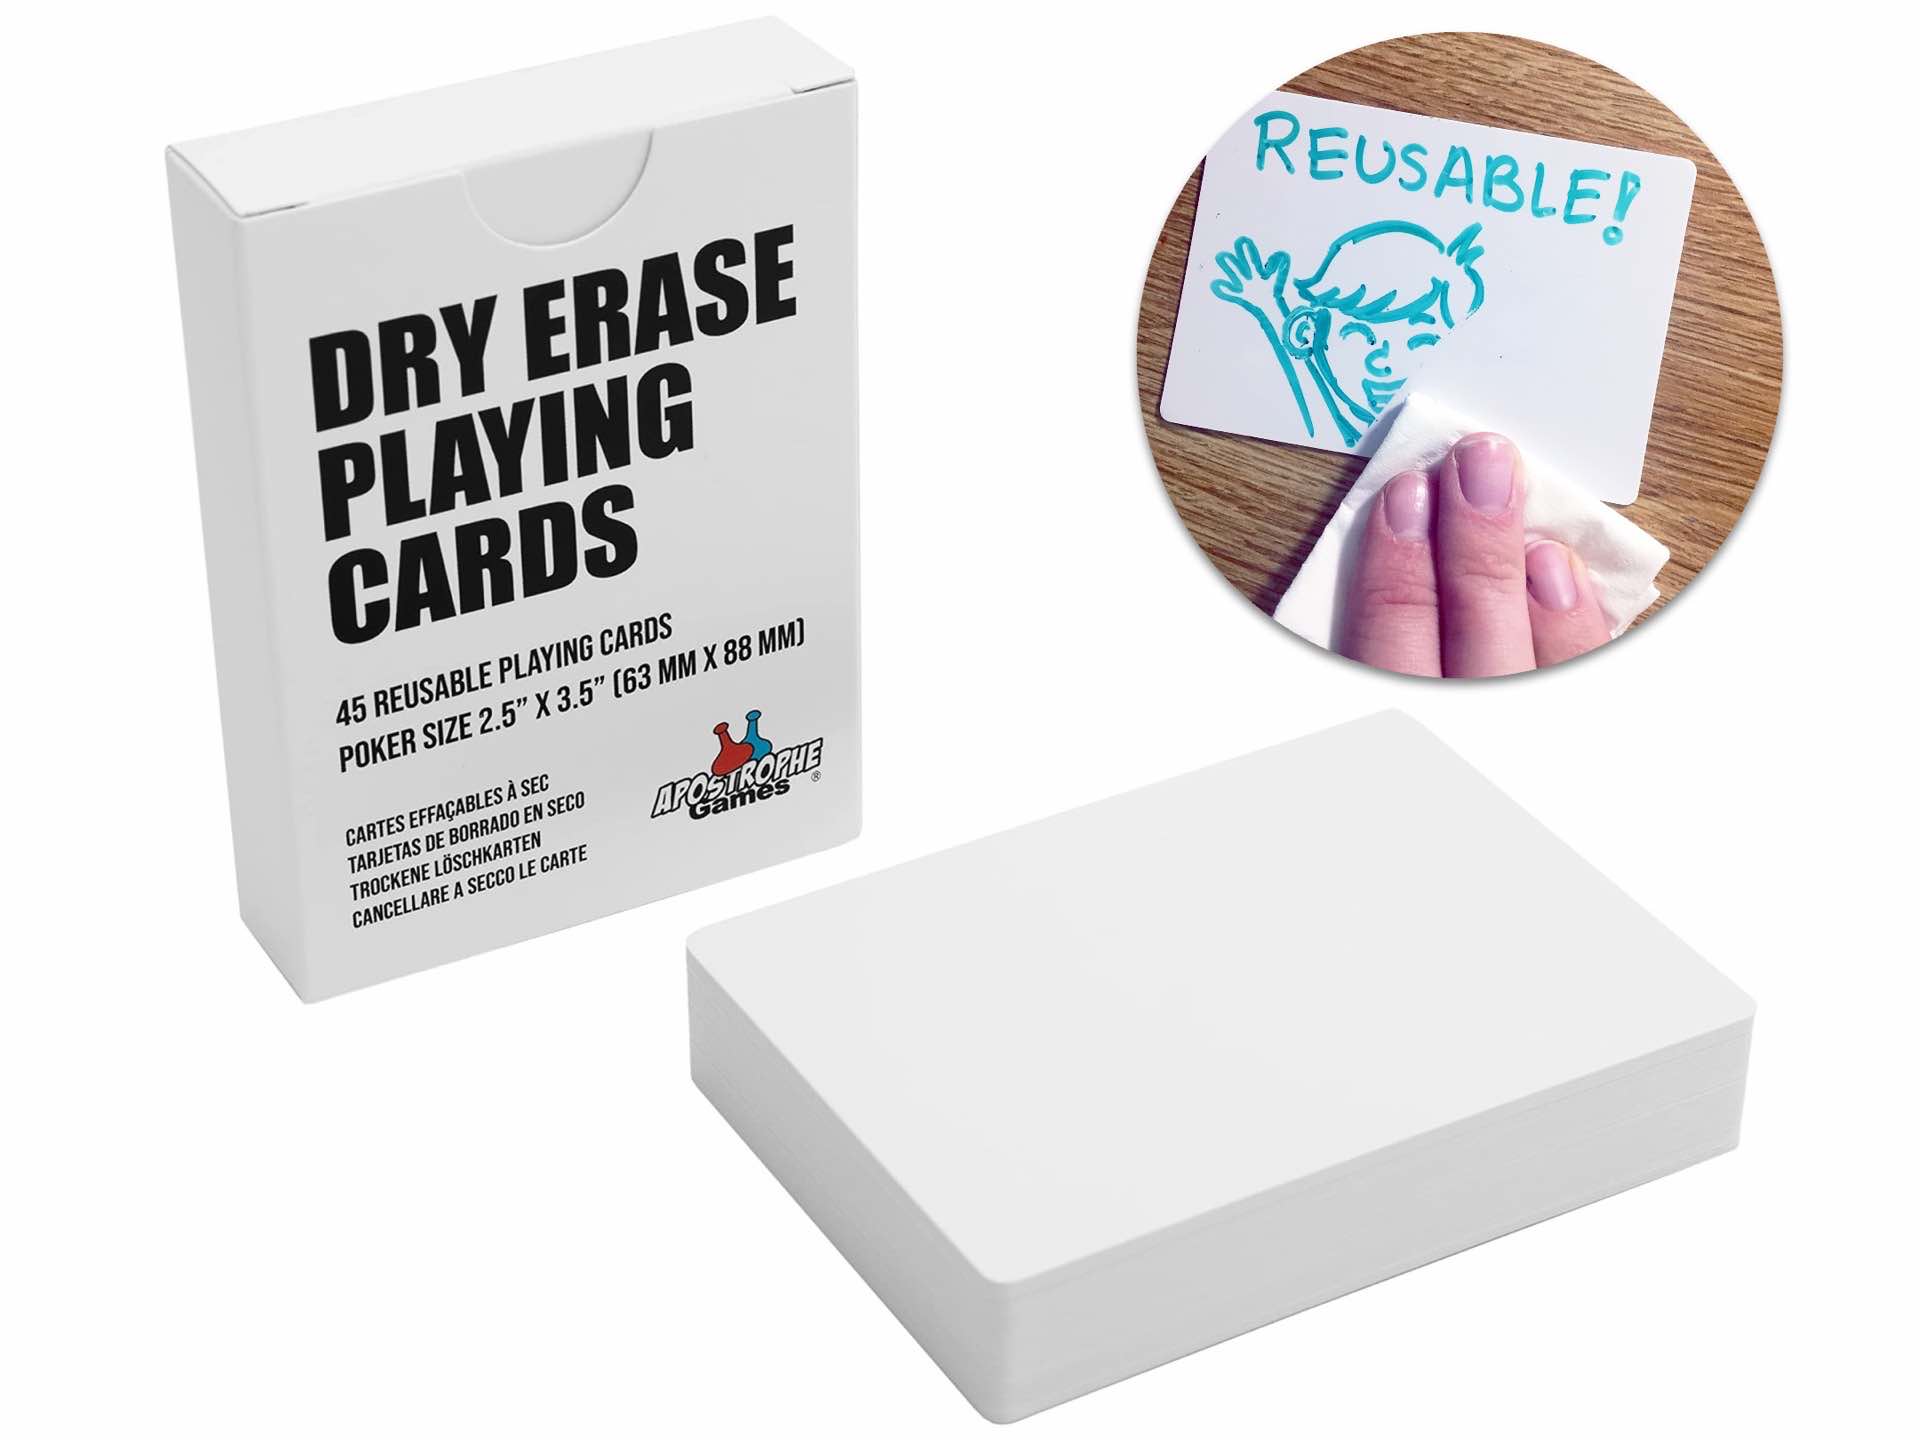 apostrophe-games-dry-erase-playing-cards